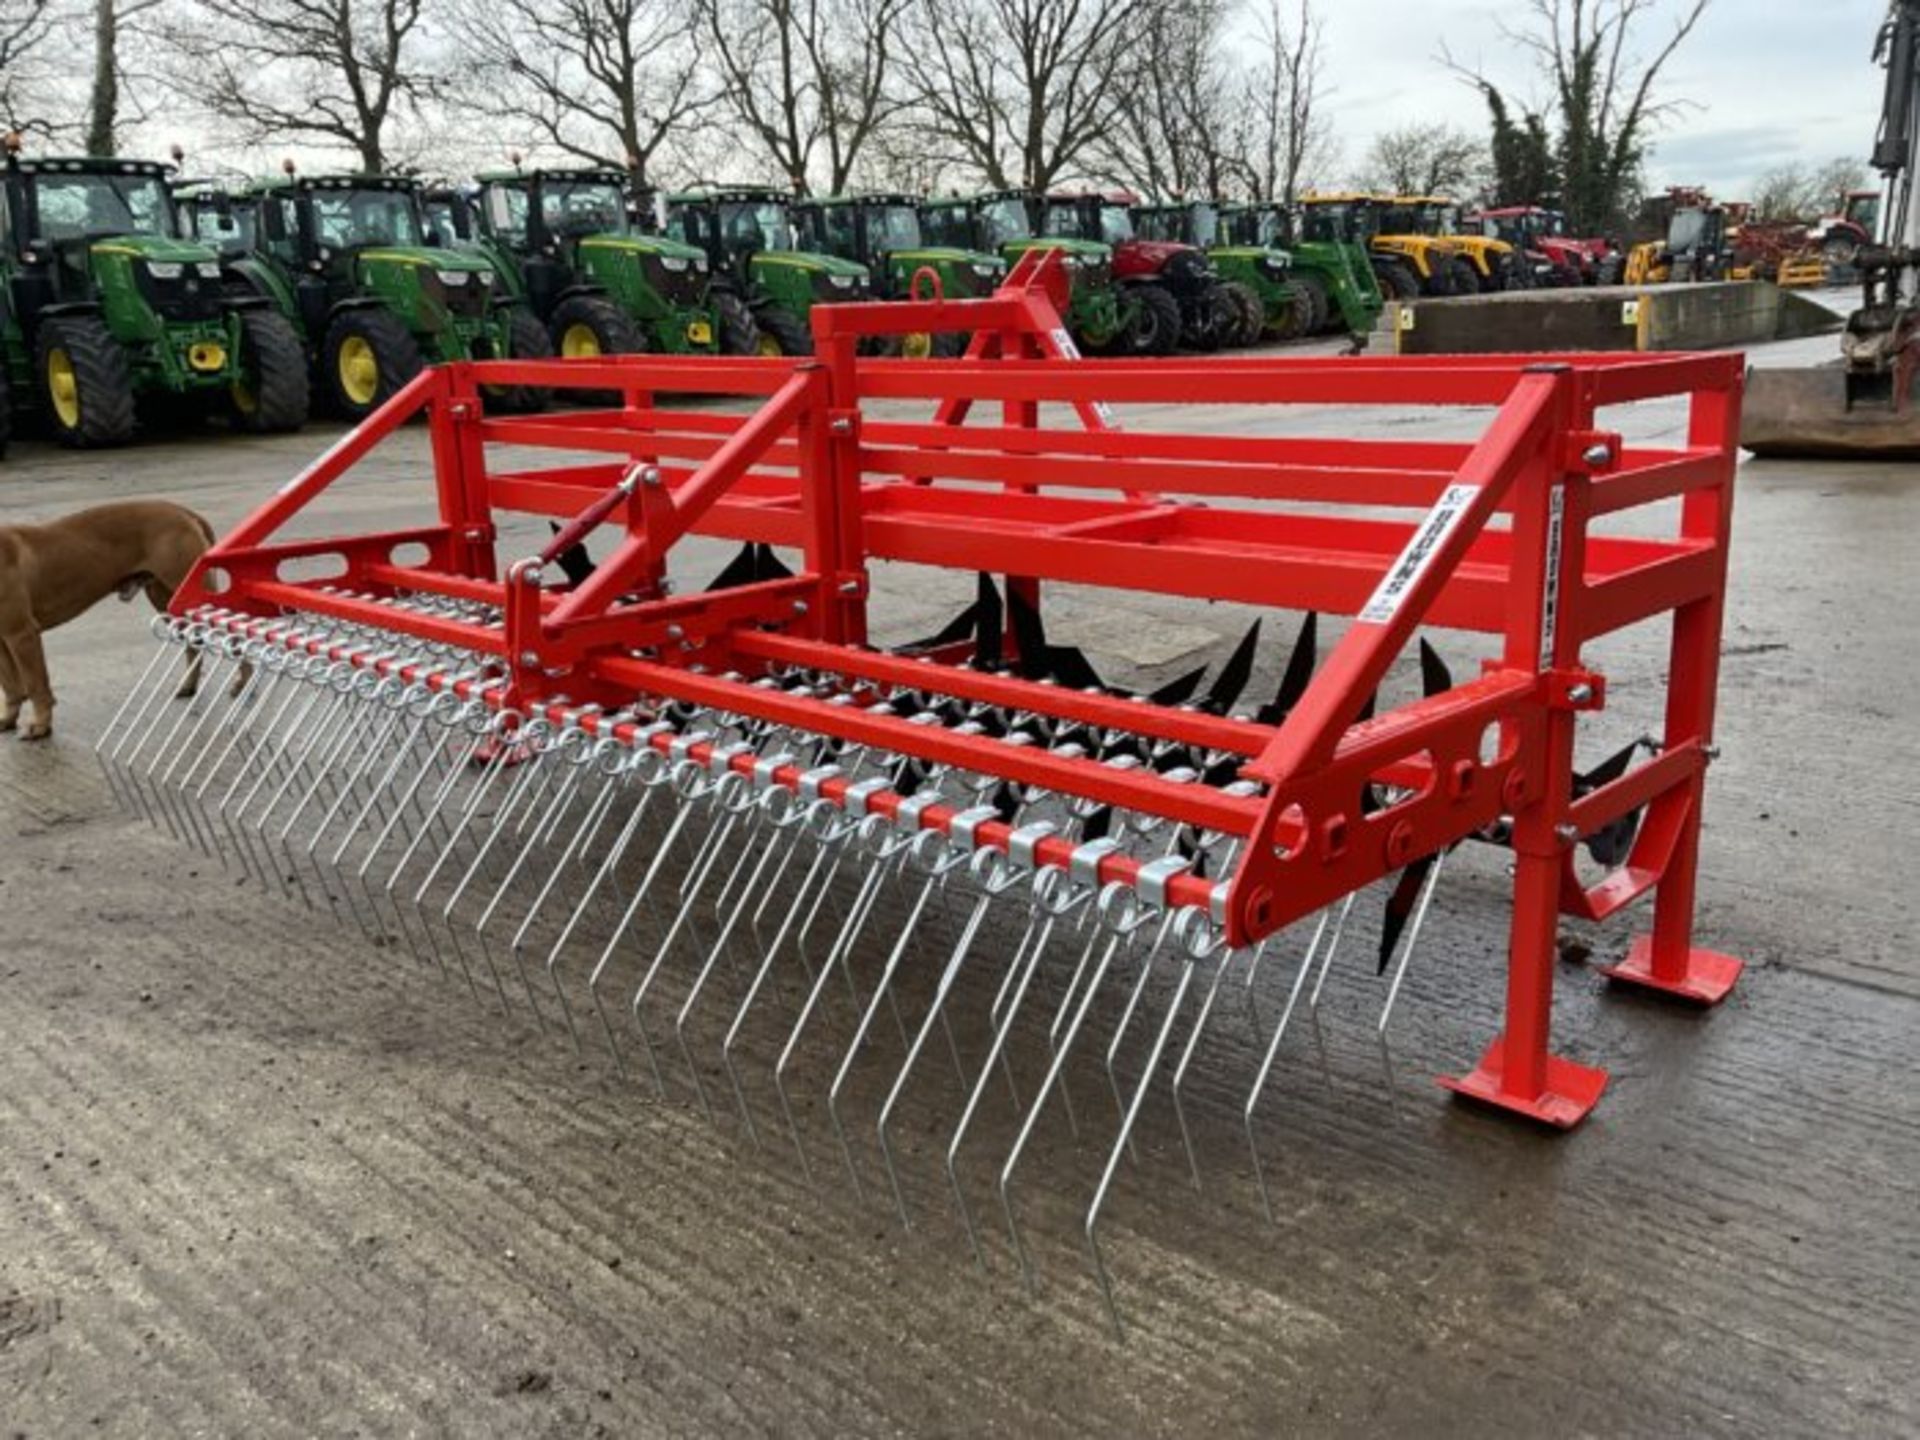 BROWNS 3M SLITMASTER WITH BROWNS SLITMASTER GRASS HARROW - Image 7 of 8